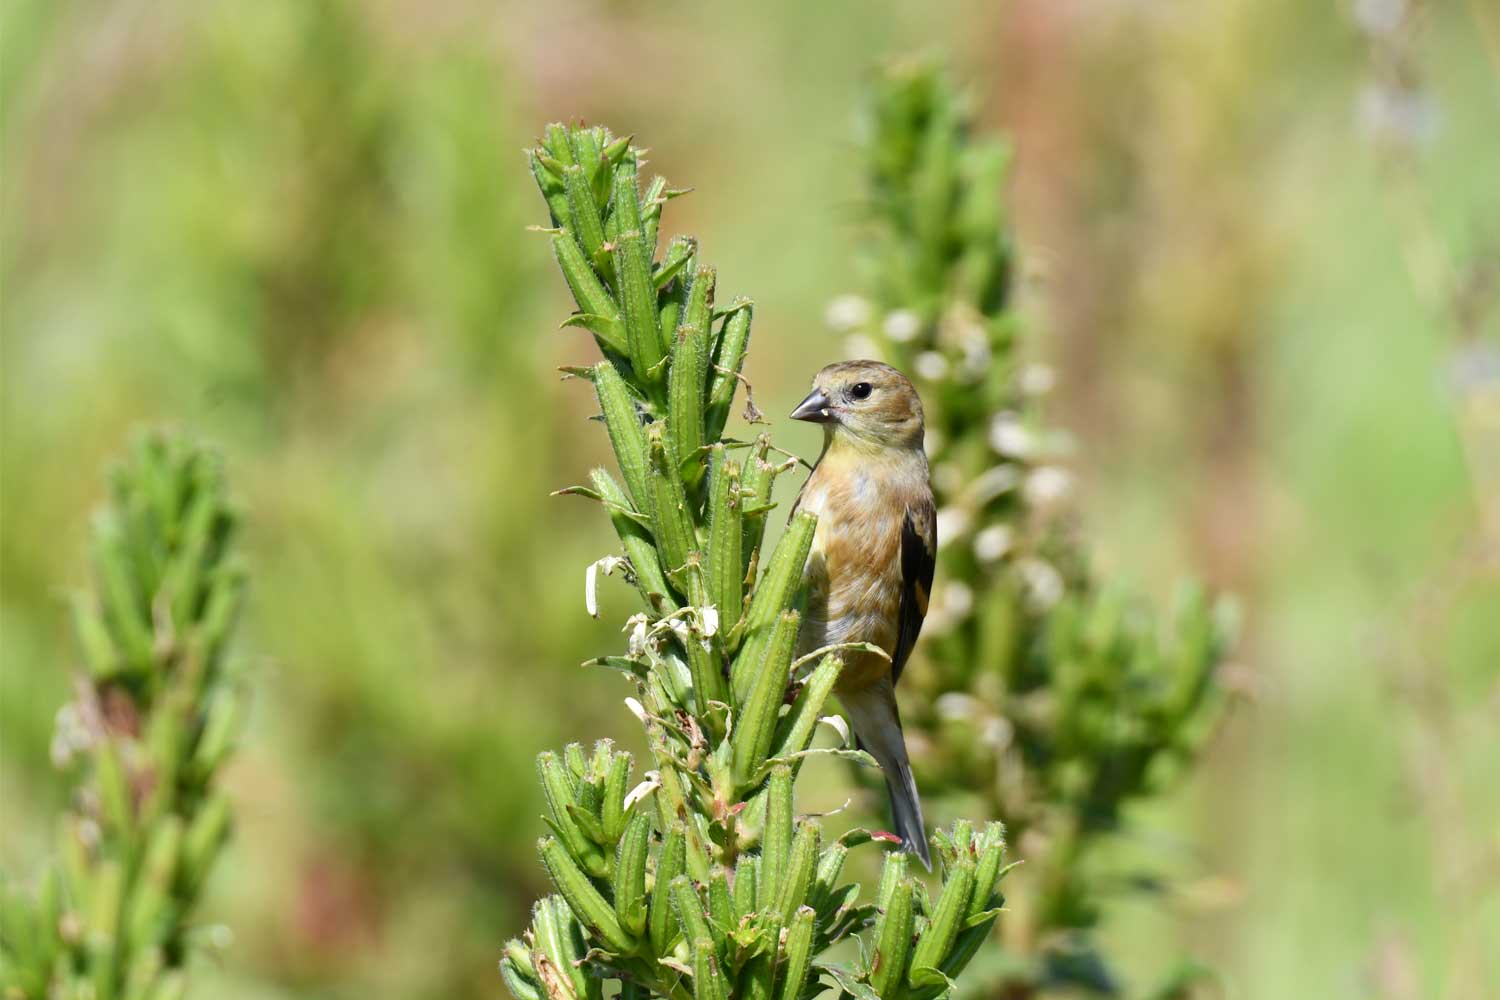 American goldfinch perched on vegetation.